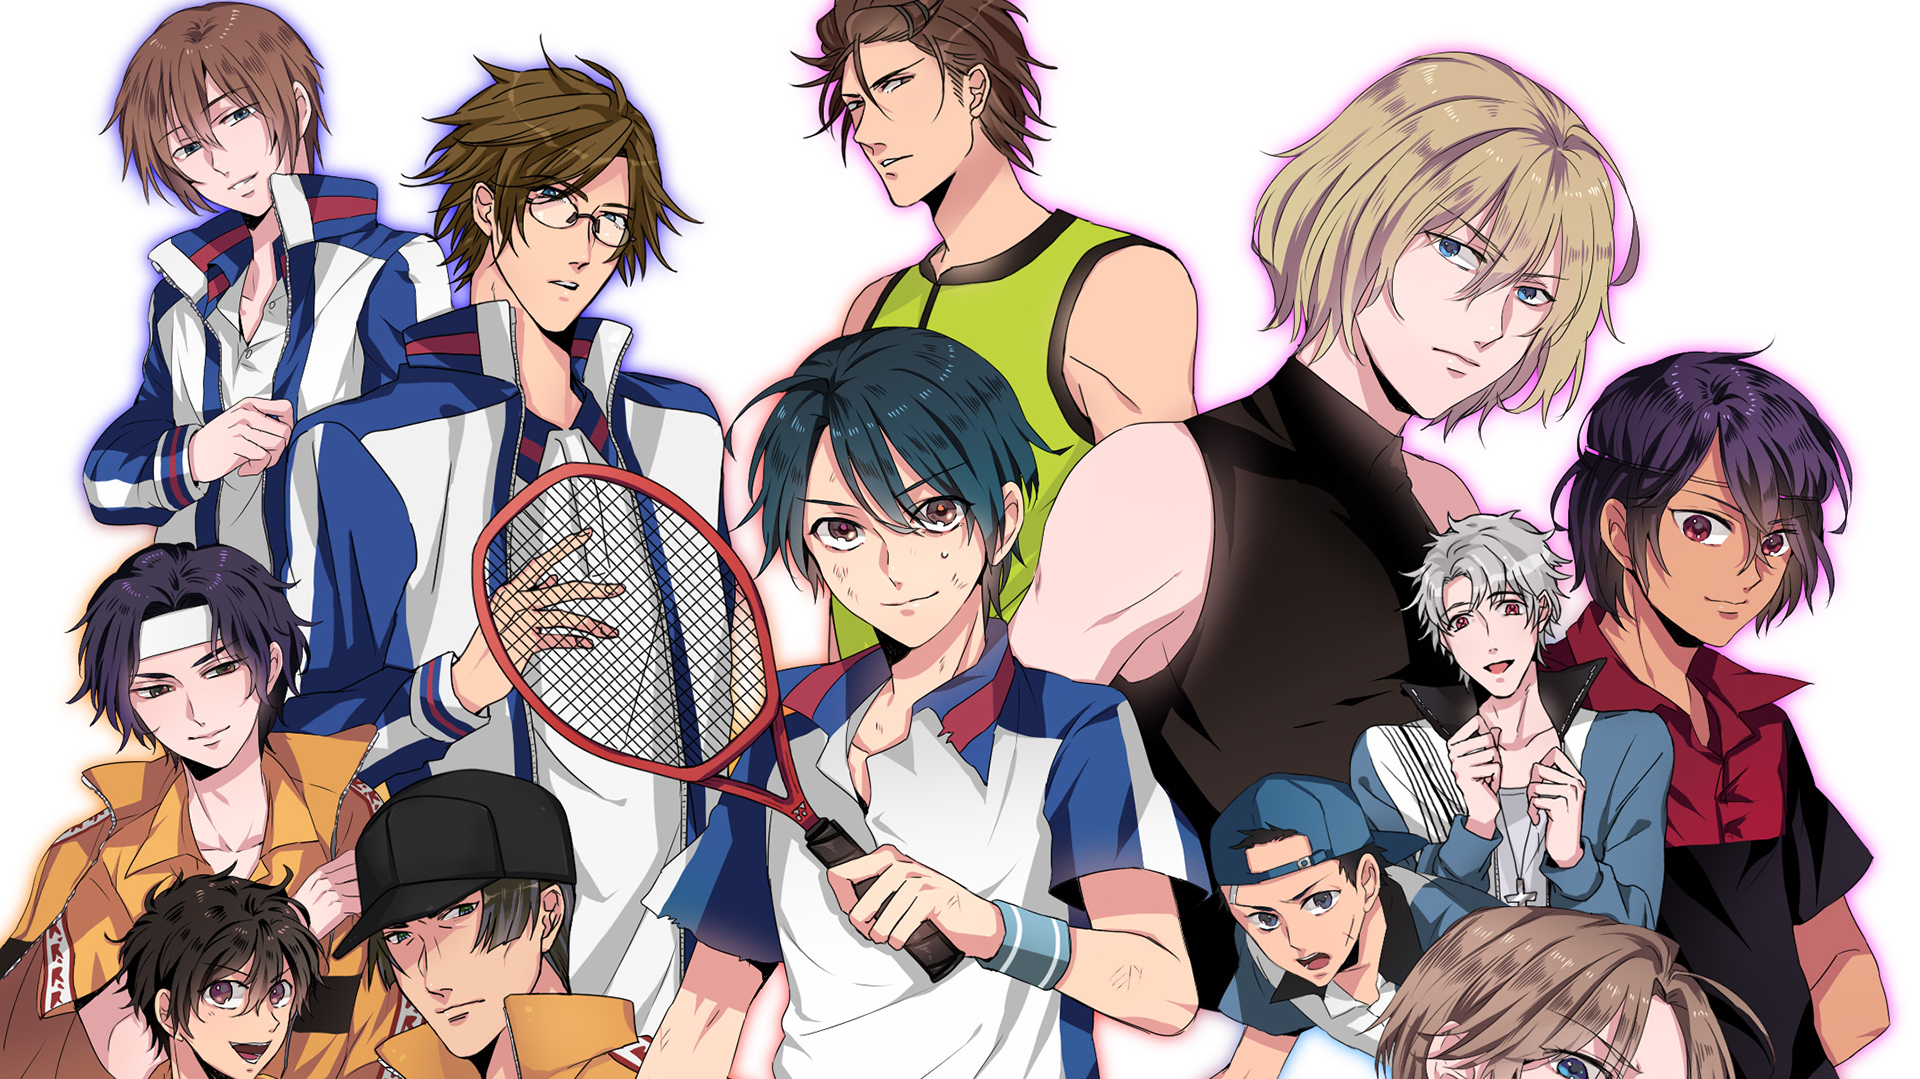 The Prince Of Tennis Wallpapers